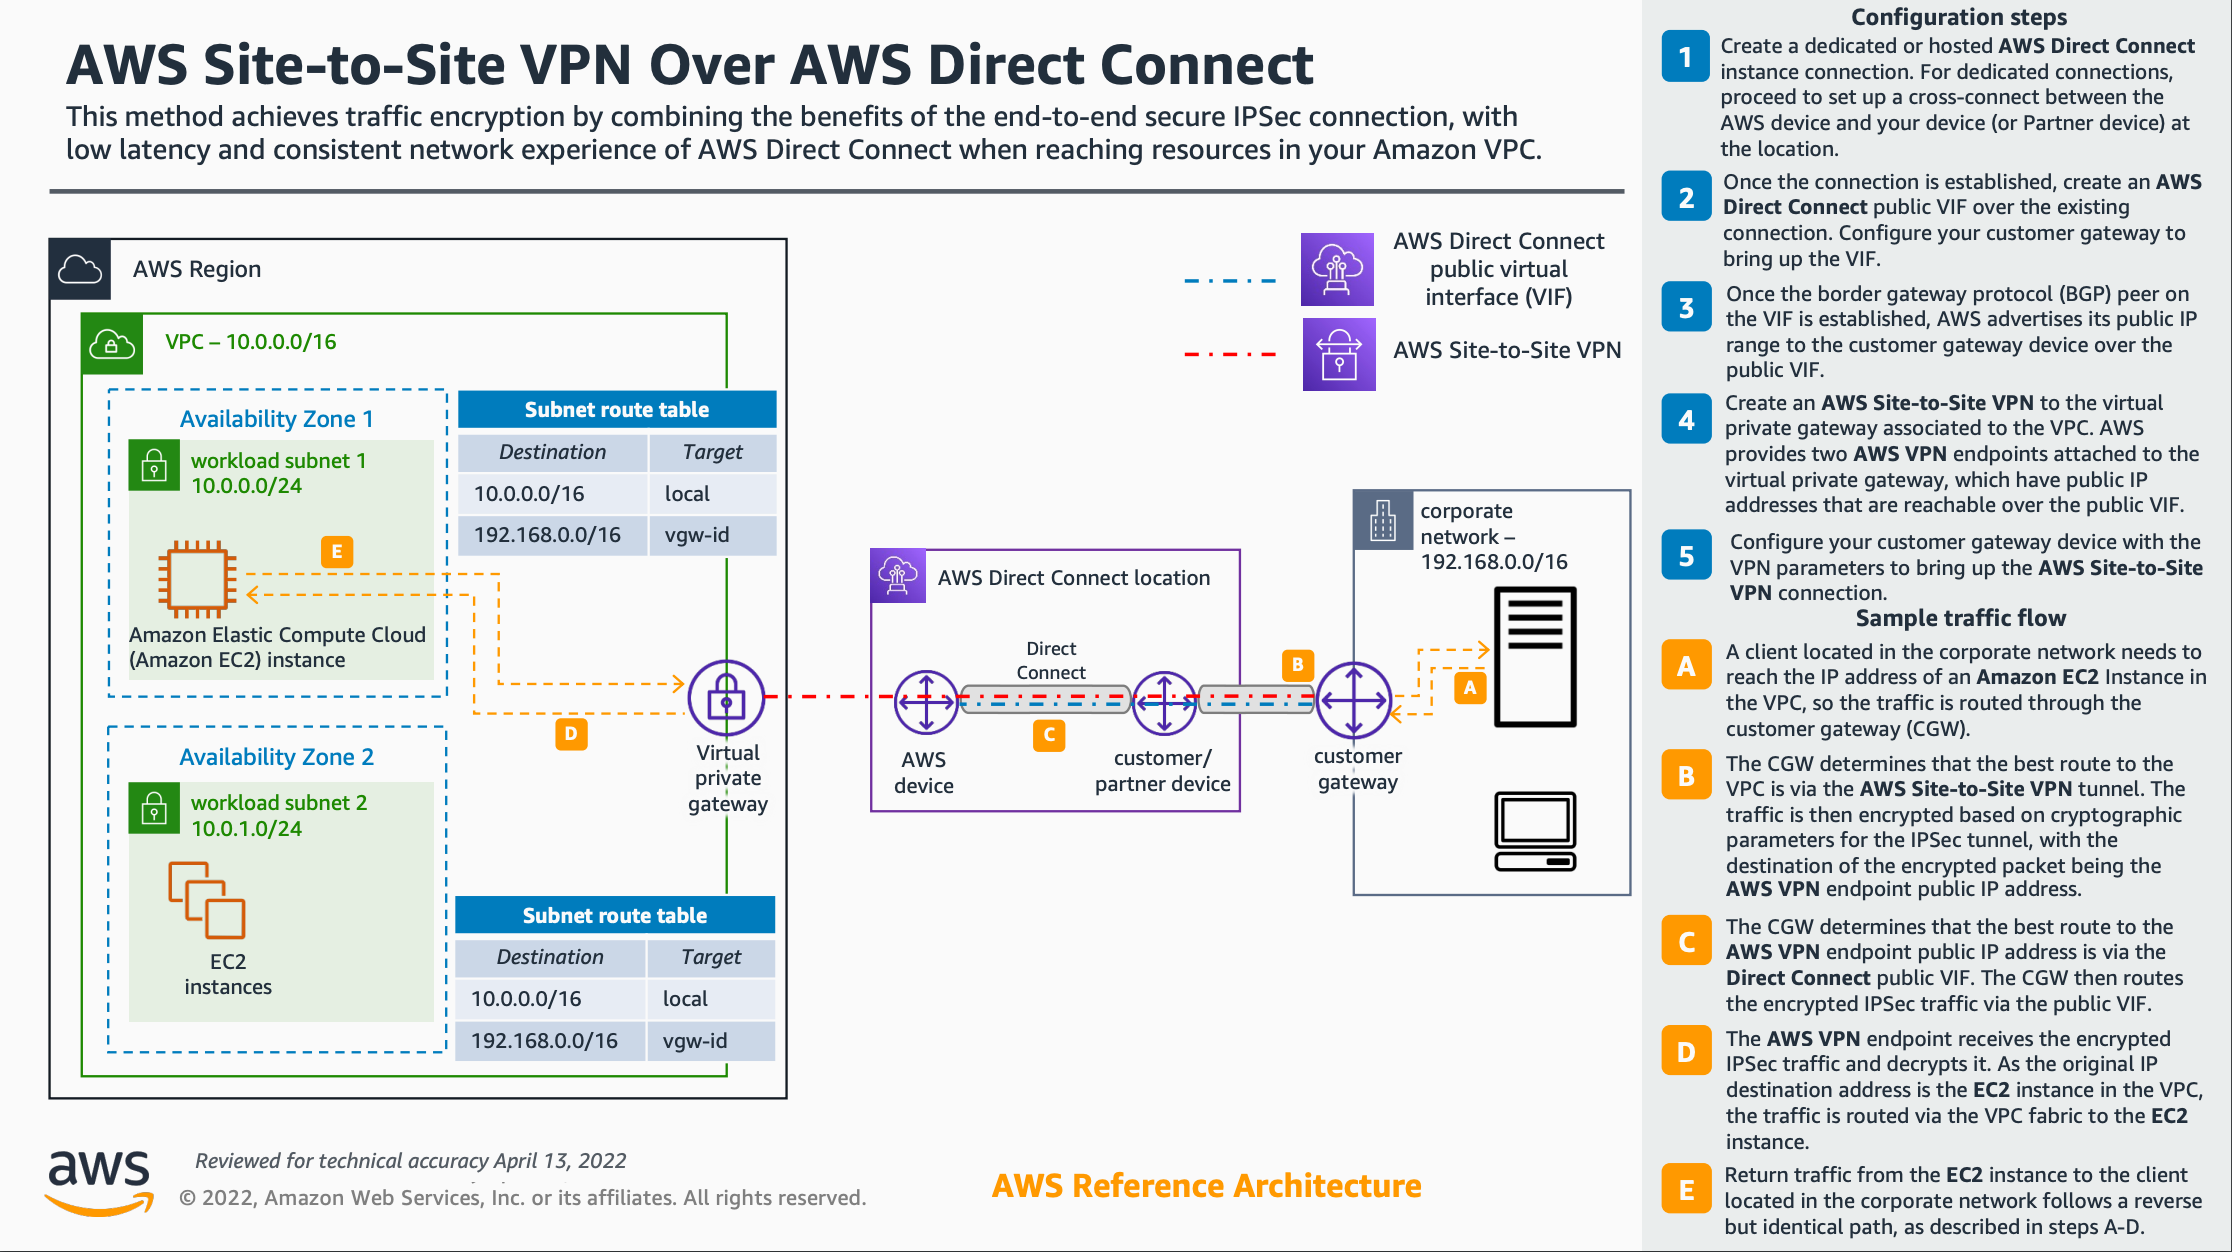 AWS Site-to-Site VPN Over AWS Direct Connect